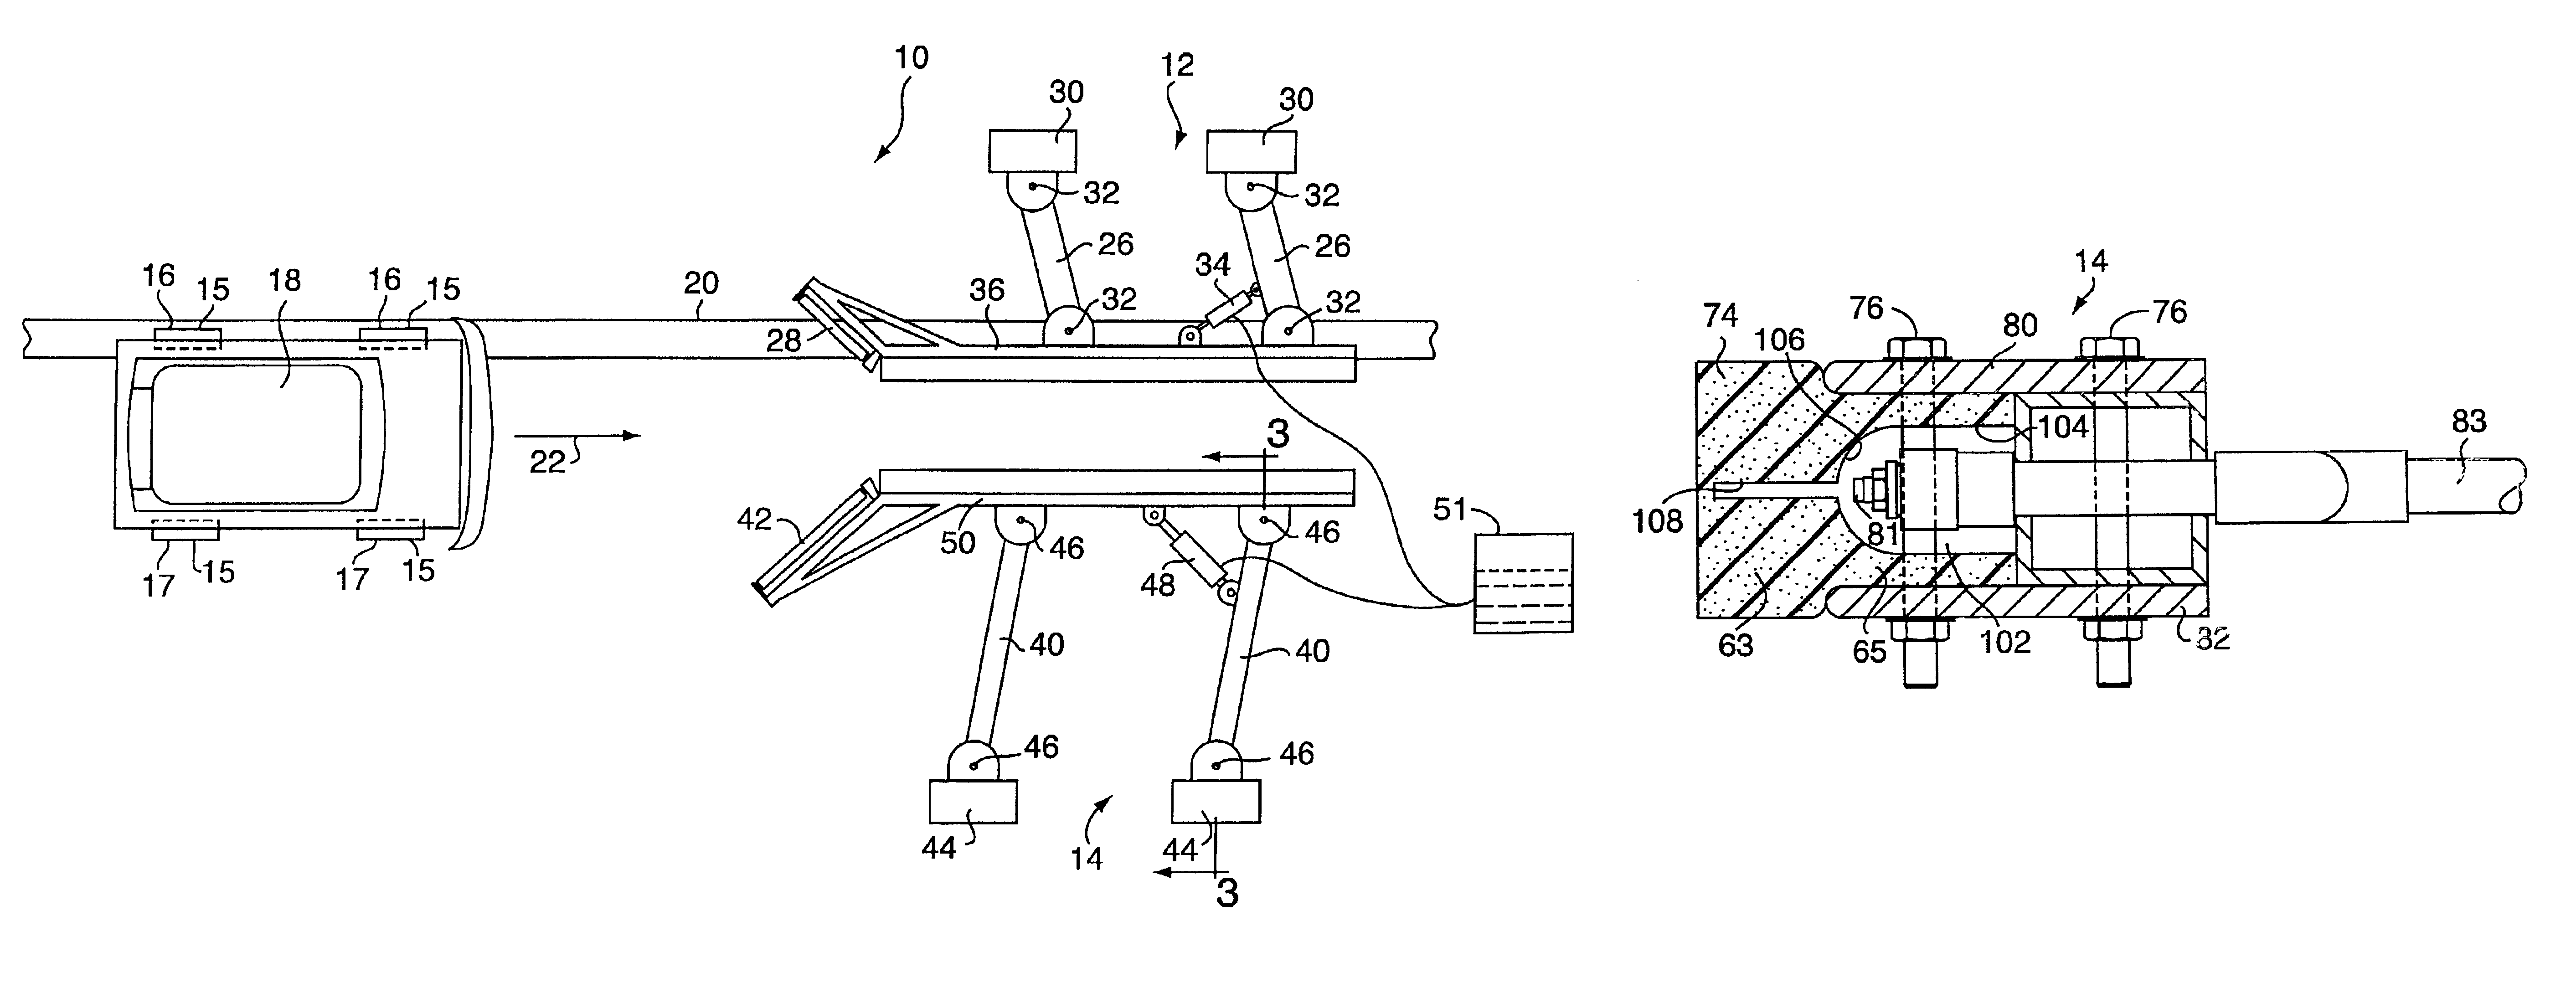 Applicator pad for use with an apparatus for applying a fluid to the tires of a vehicle